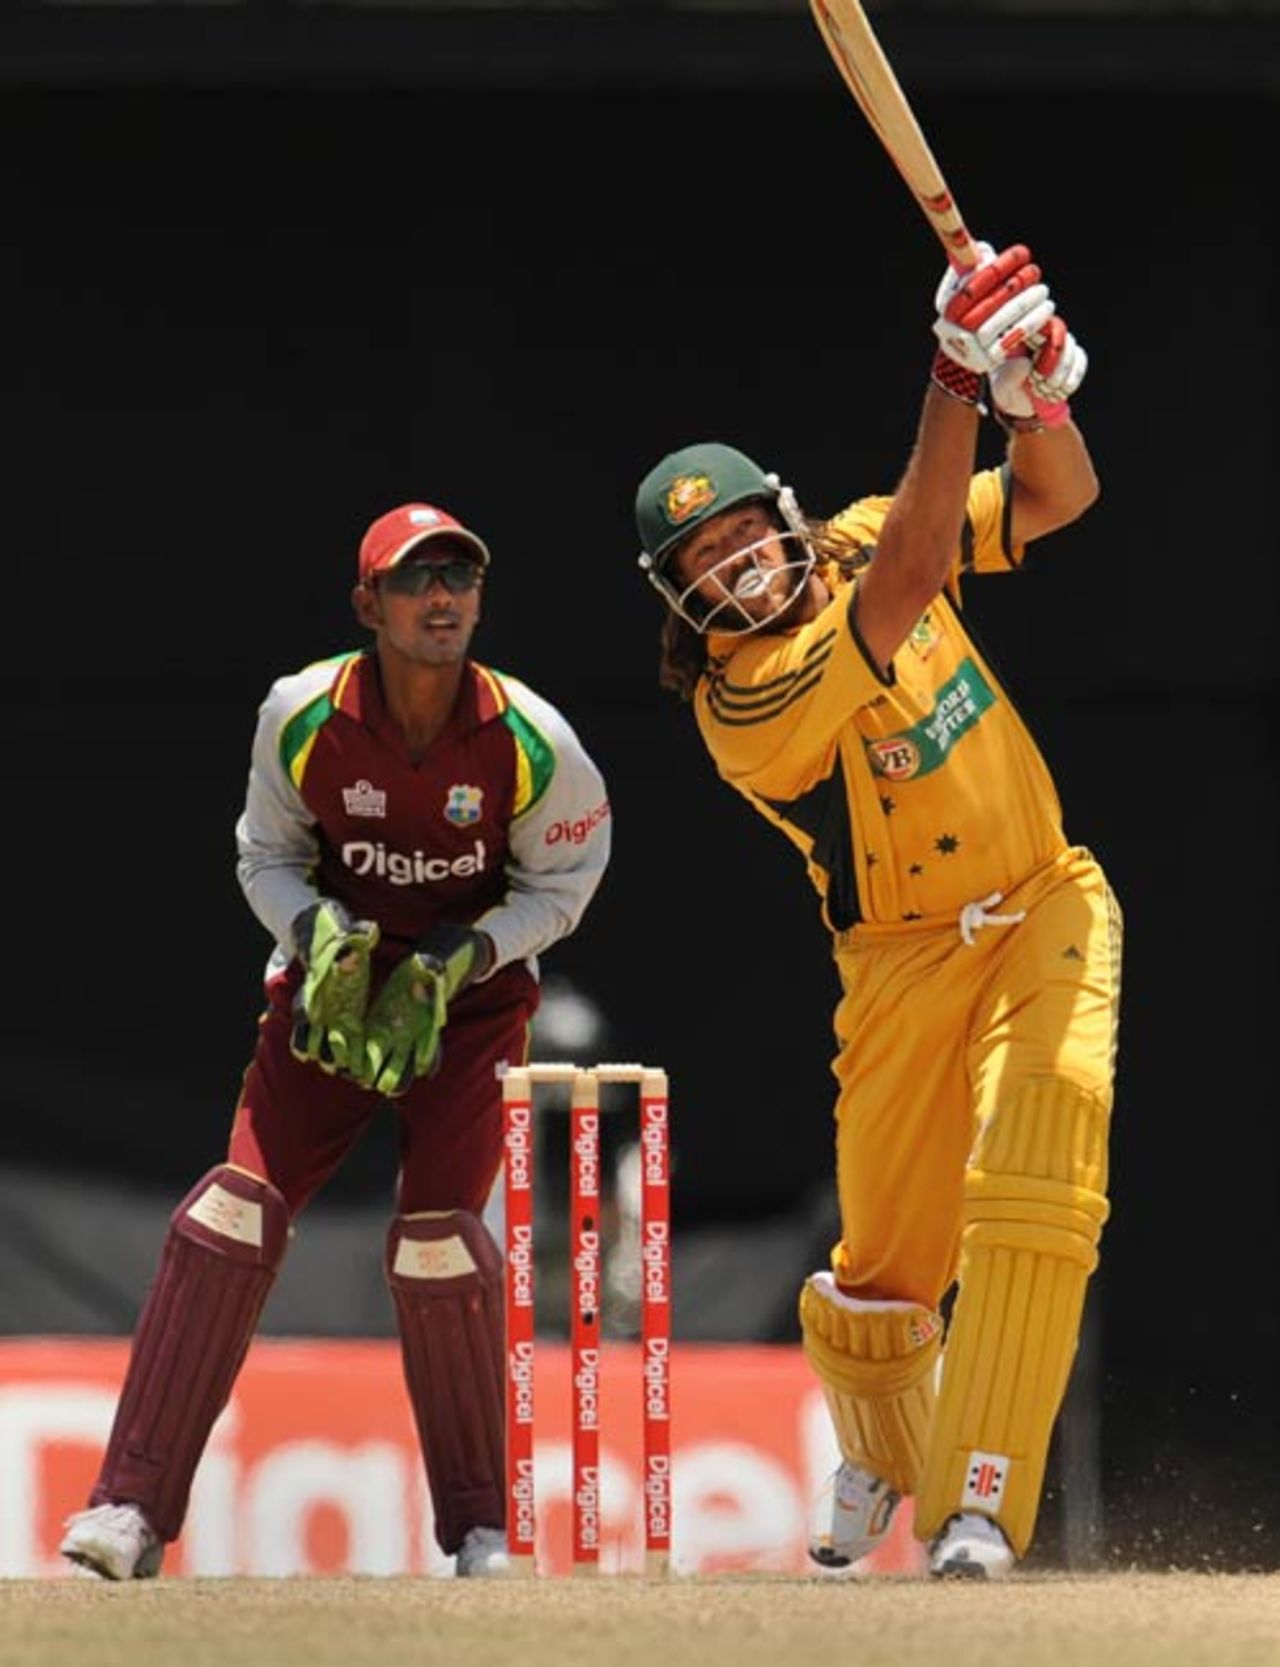 Andrew Symonds launches a six over long on, West Indies v Australia, 4th ODI, St Kitts, July 4, 2008